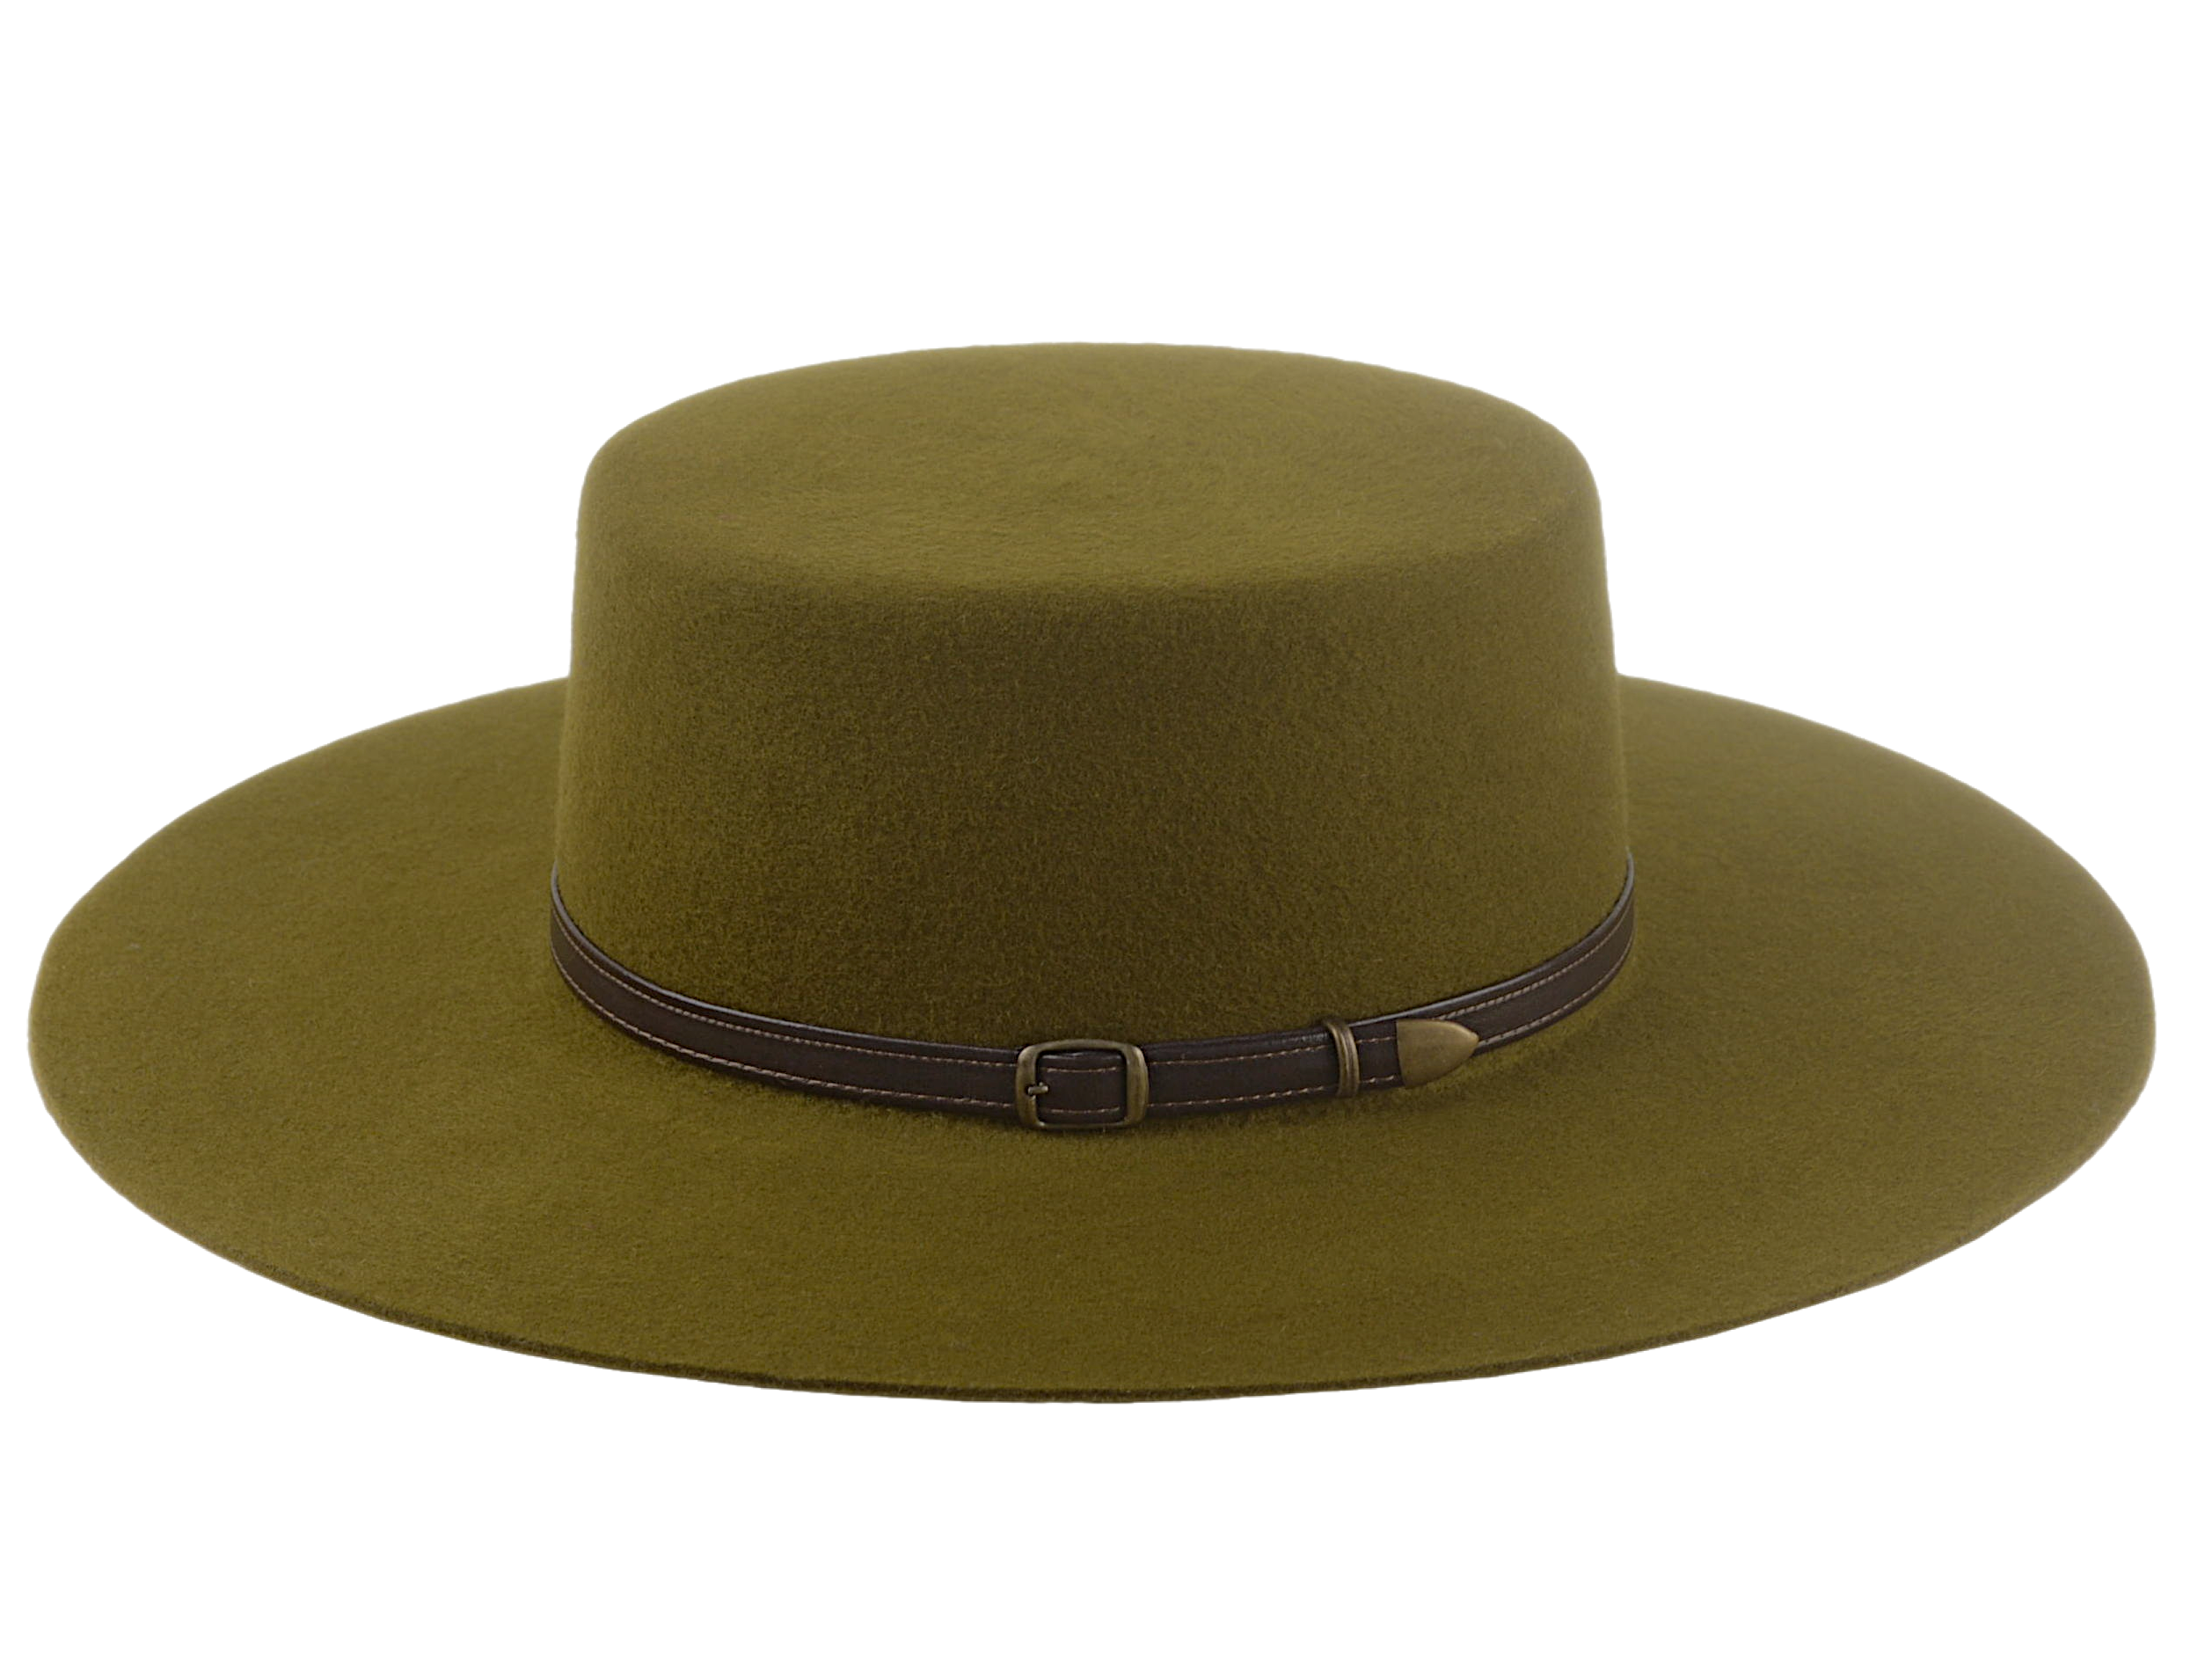 Outback Style Wide Brim Hat | The GALLOPER | Custom Handmade Hats Agnoulita Hats 2 | Olive Green, Western Style